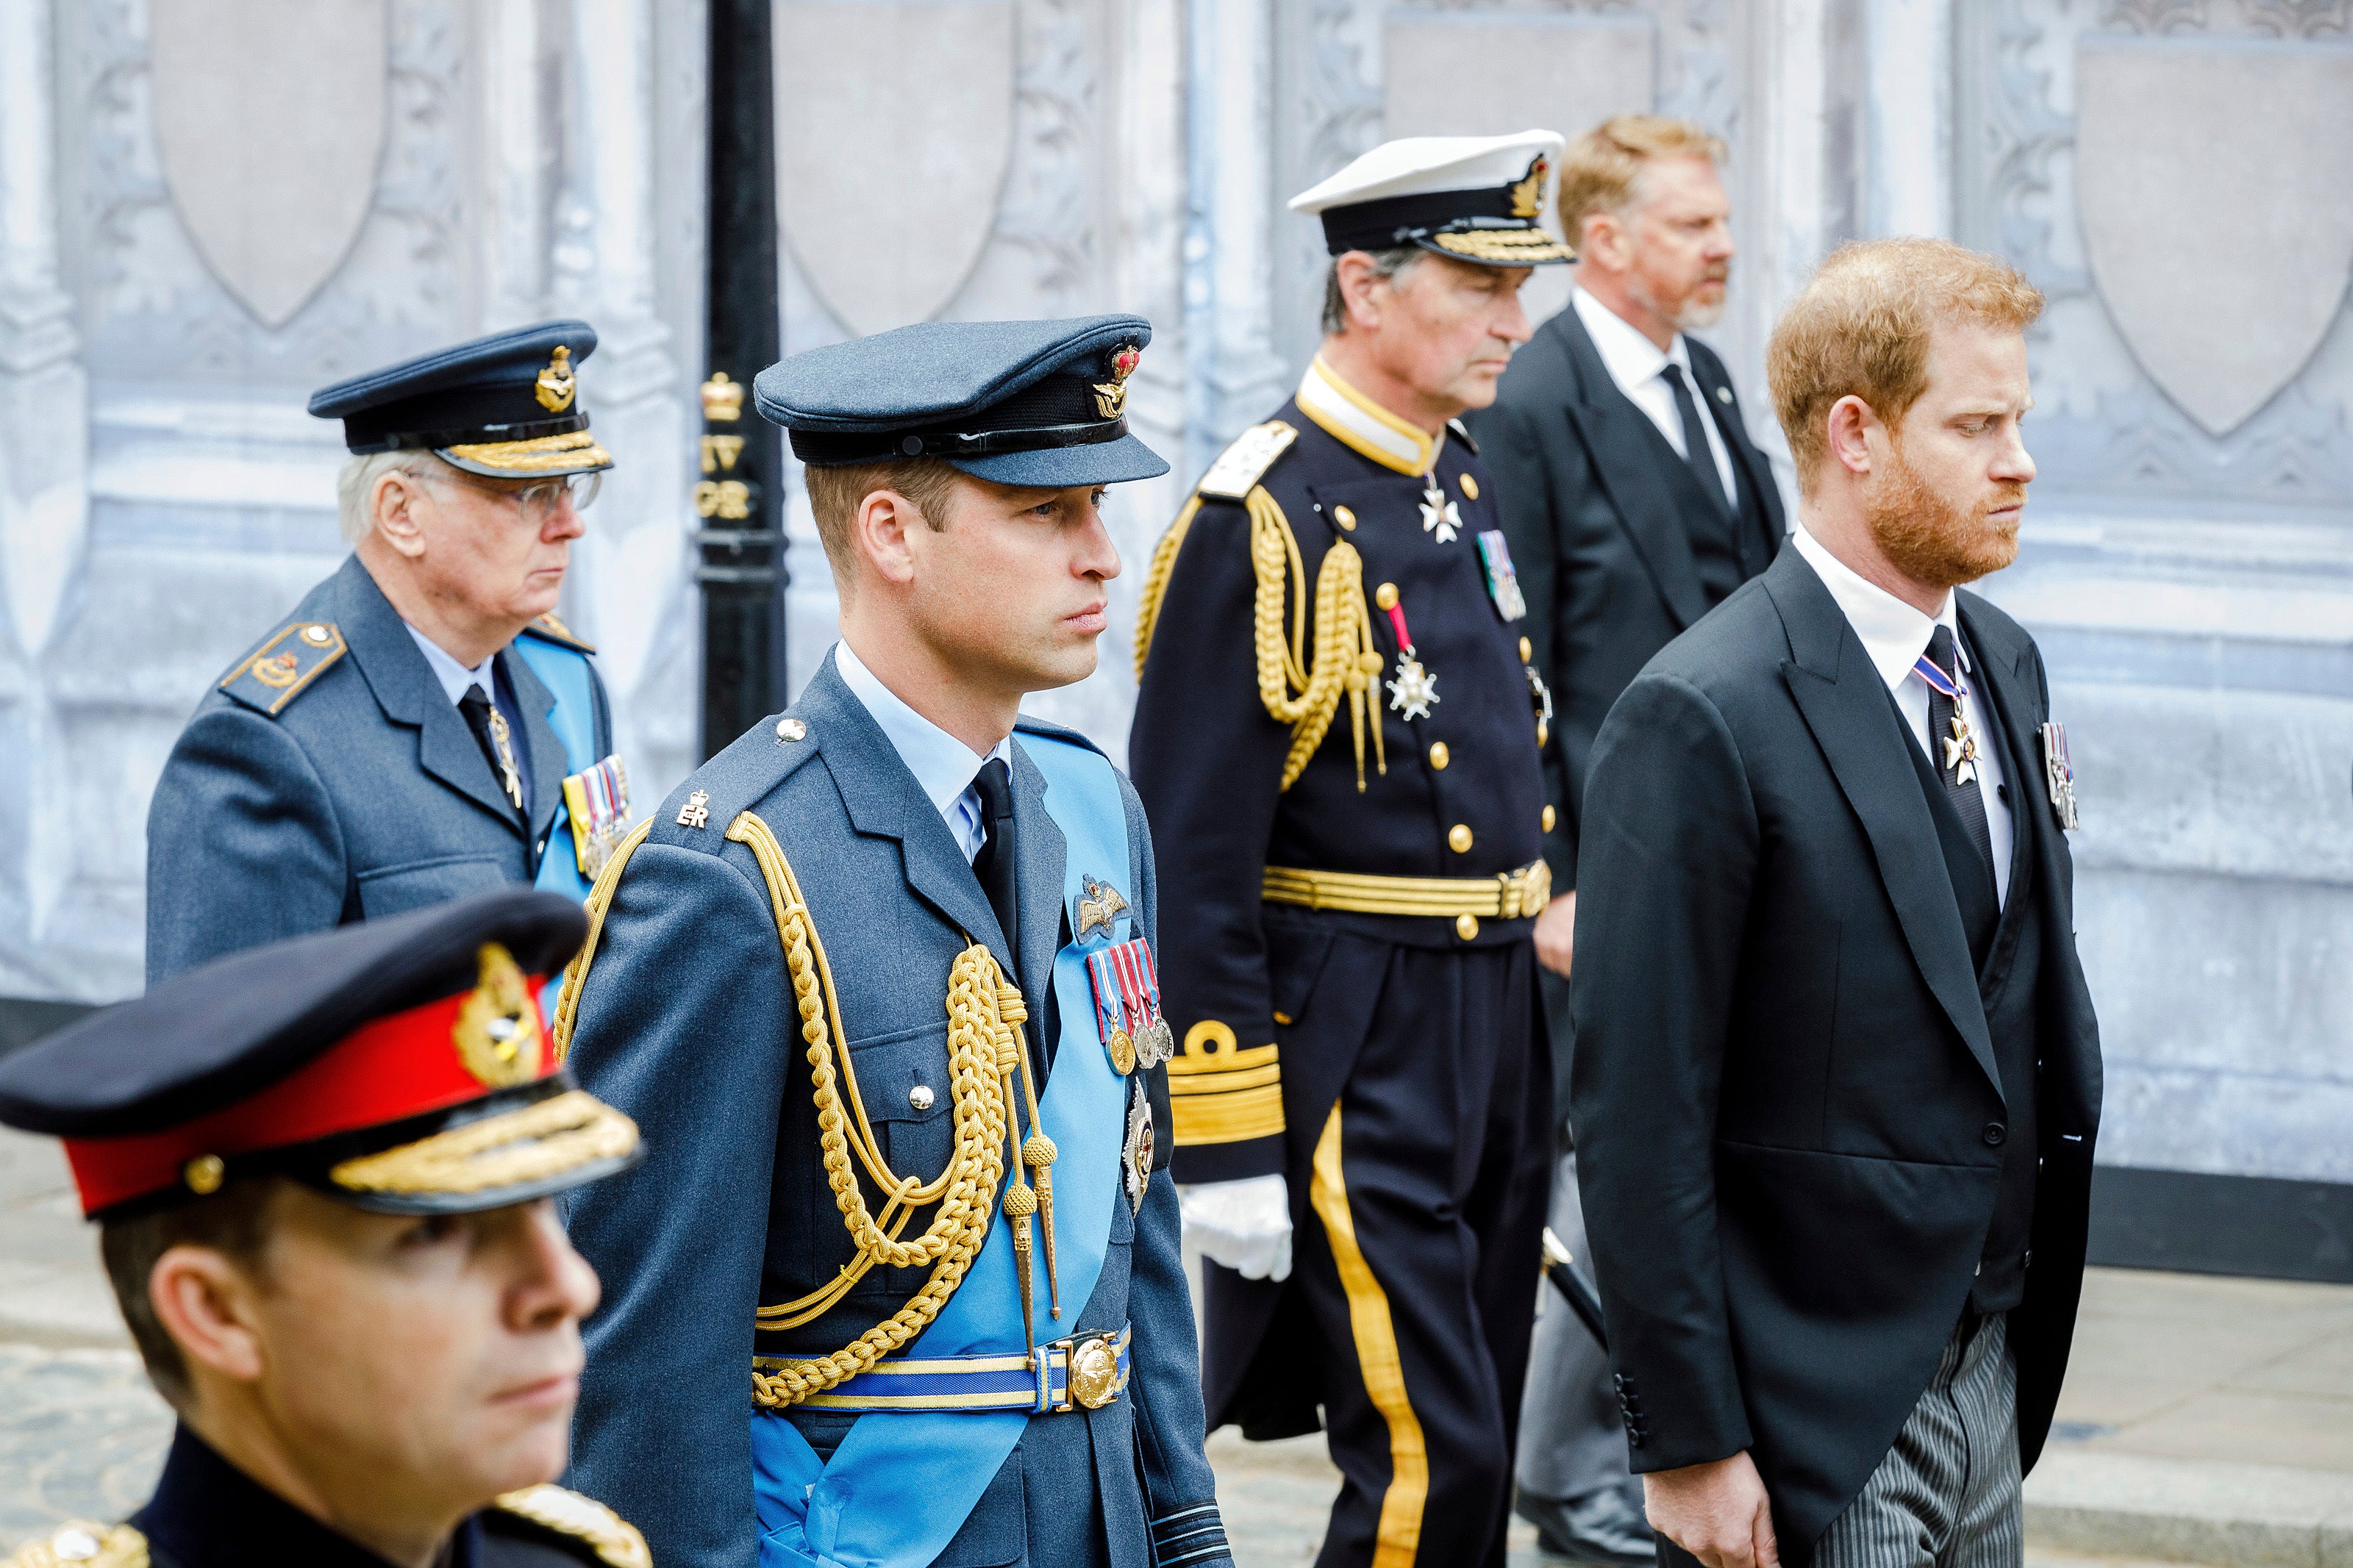 Brothers Prince William and Prince Harry were reunited in grief